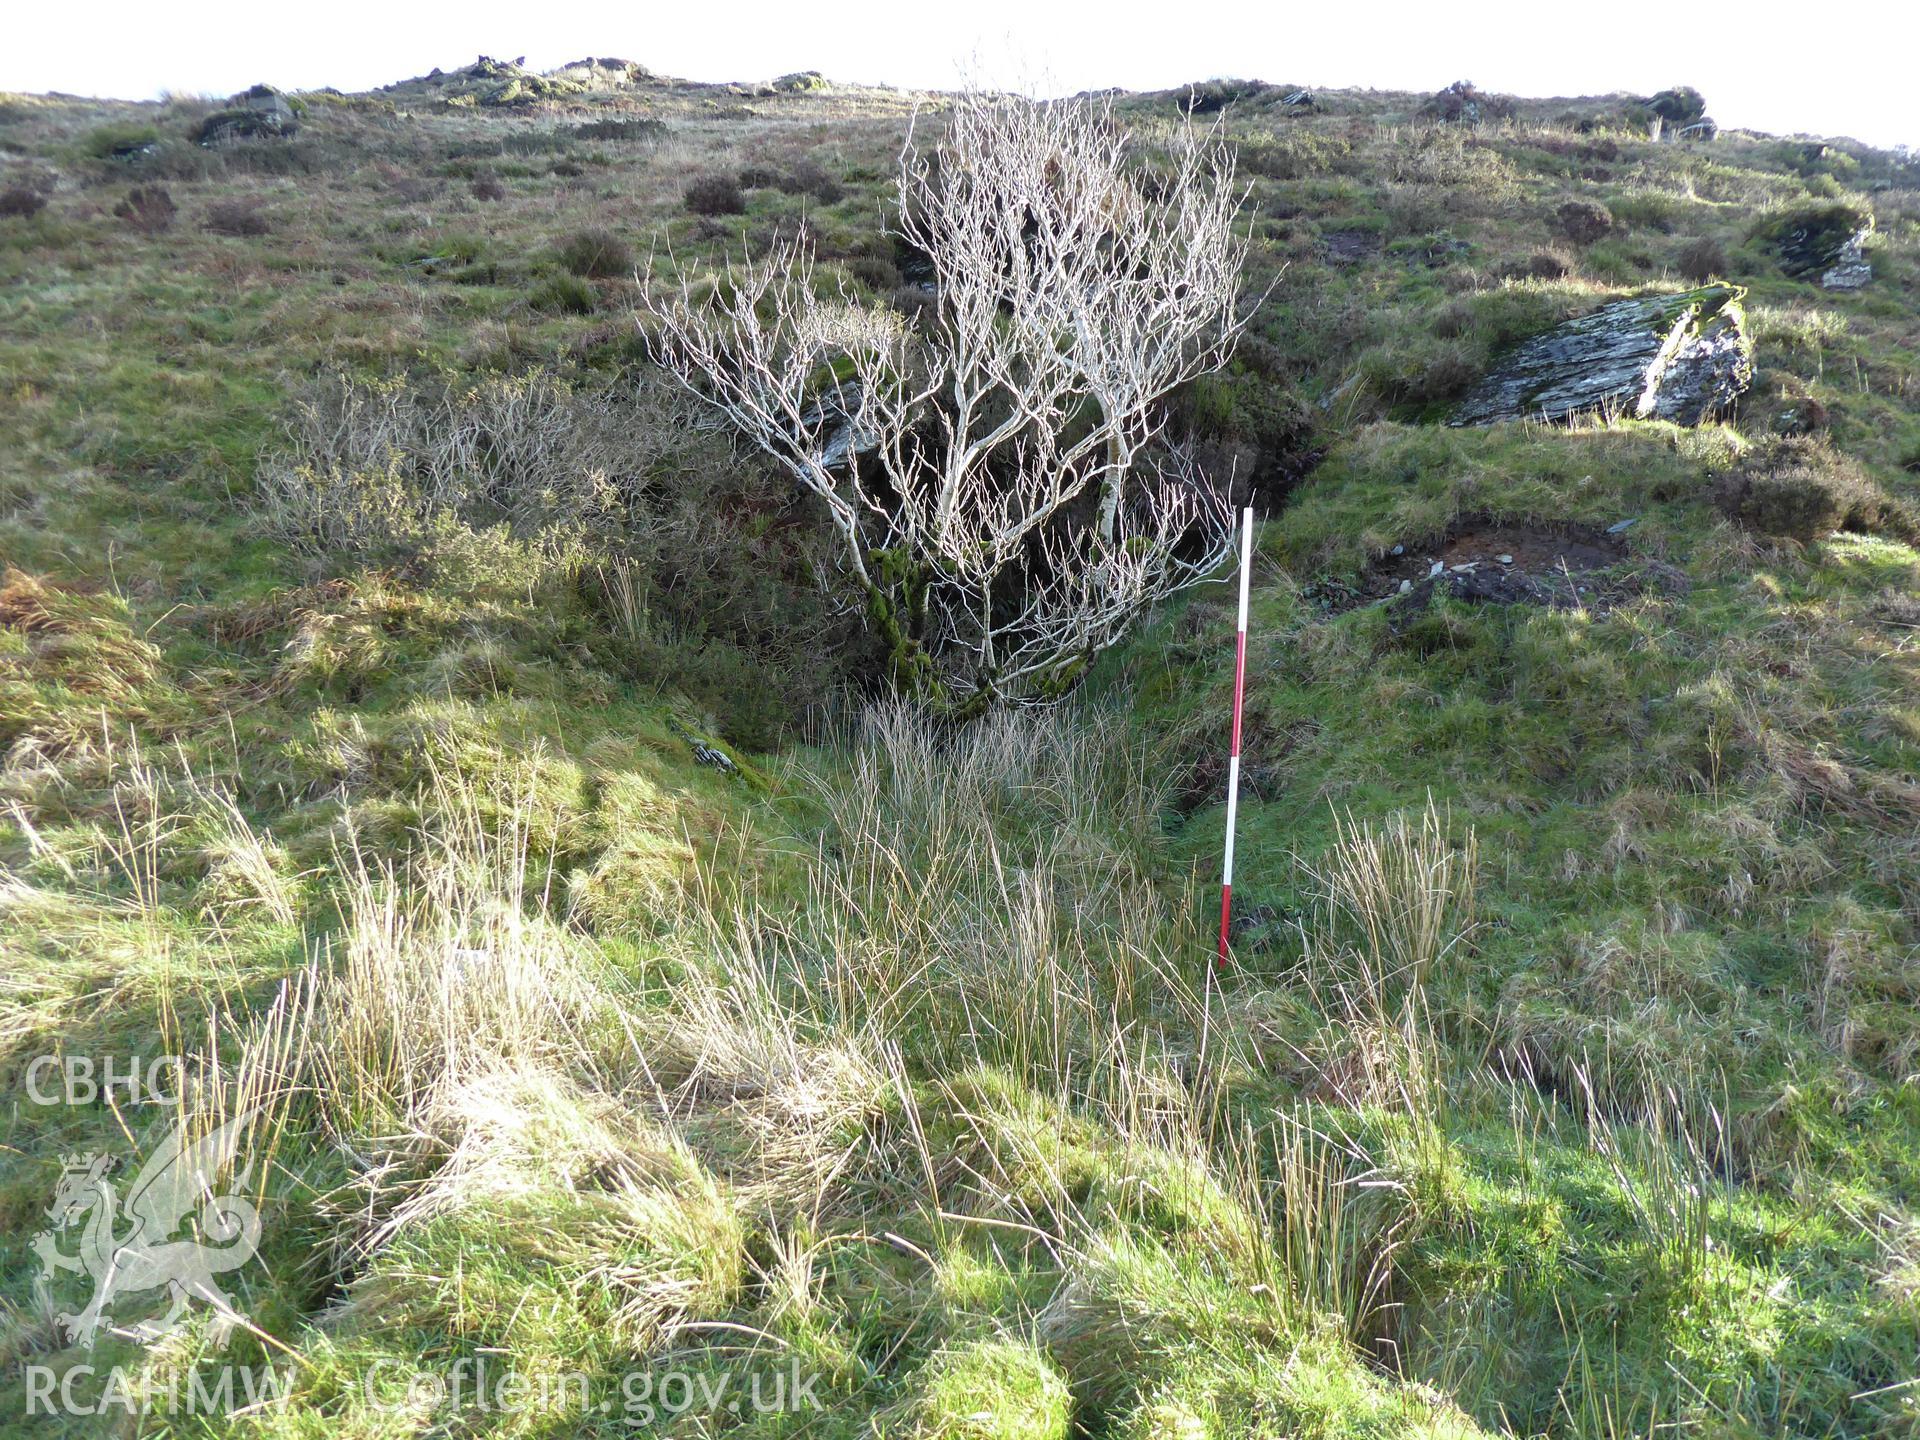 Adit for Moel Bowydd Trail, photographed on 11th February 2019 as part of archaeological assessment of Antur Stiniog Downhill Cycle Tracks Extension, conducted by I. P. Brooks of Engineering Archaeological Services Ltd.